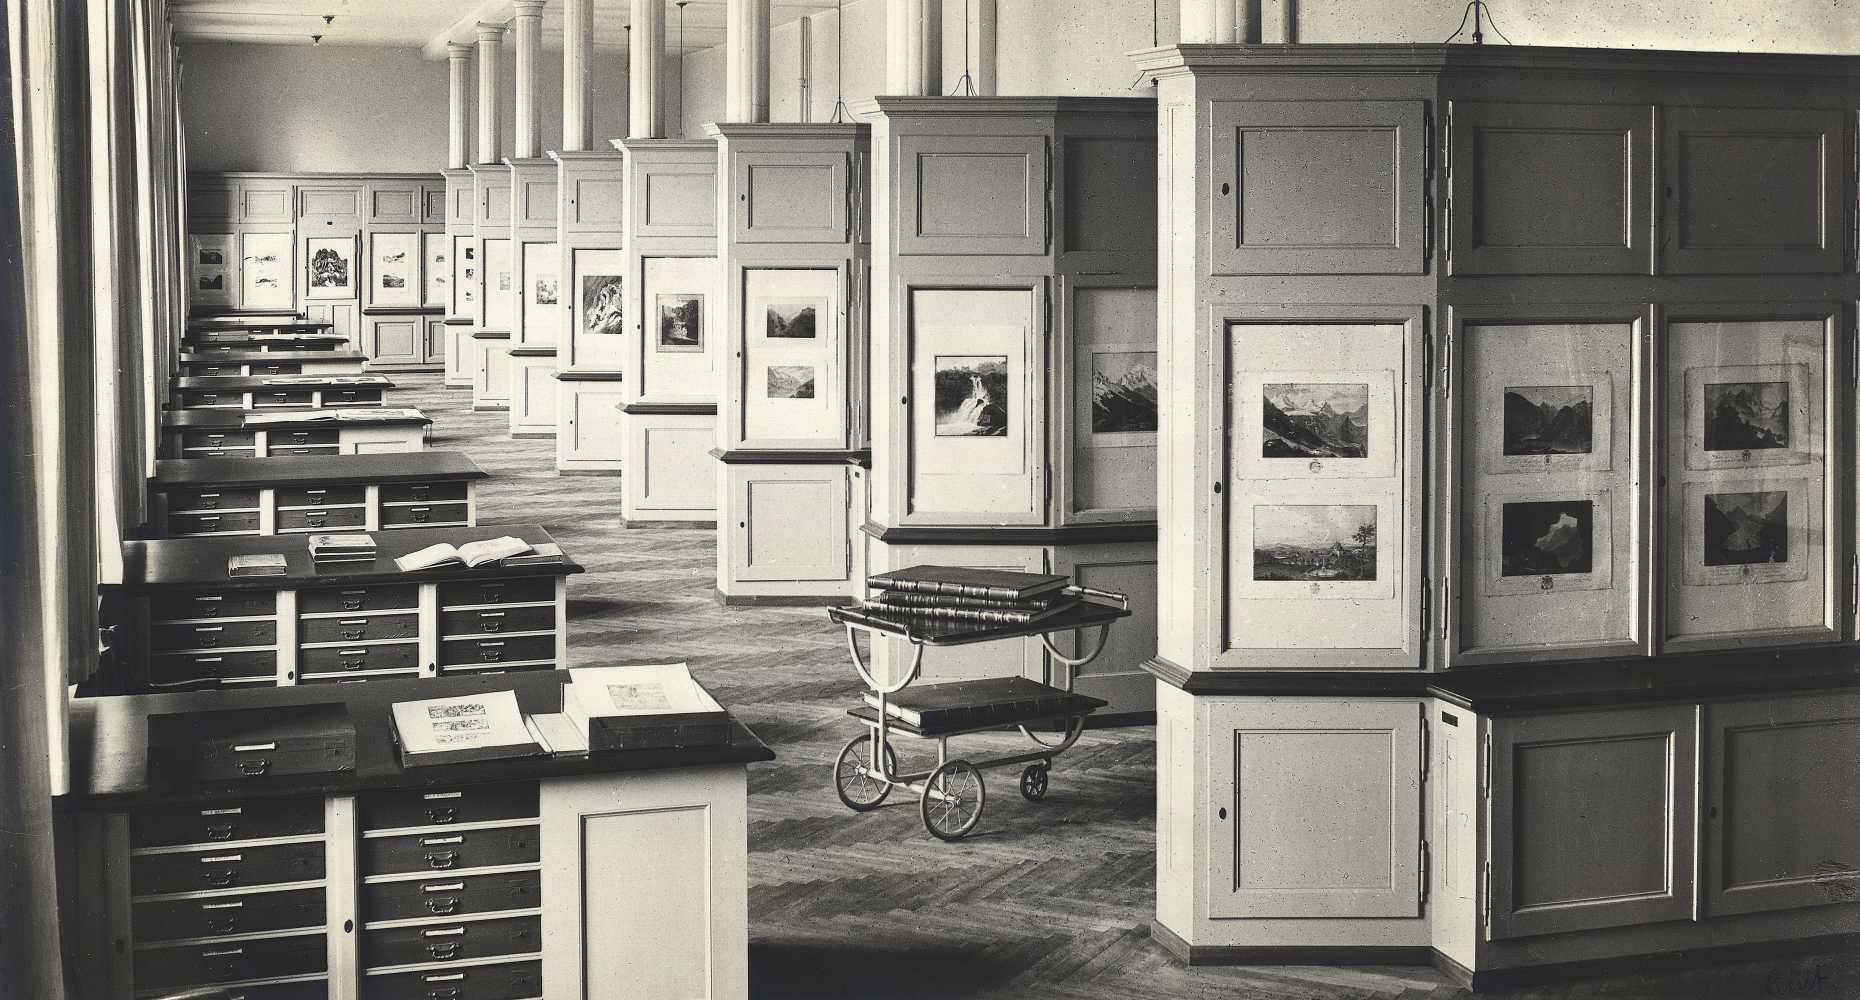 Main depot of the Graphische Sammlung used as collection and exhibition space, 1924-1969. (Photography: ETH library)